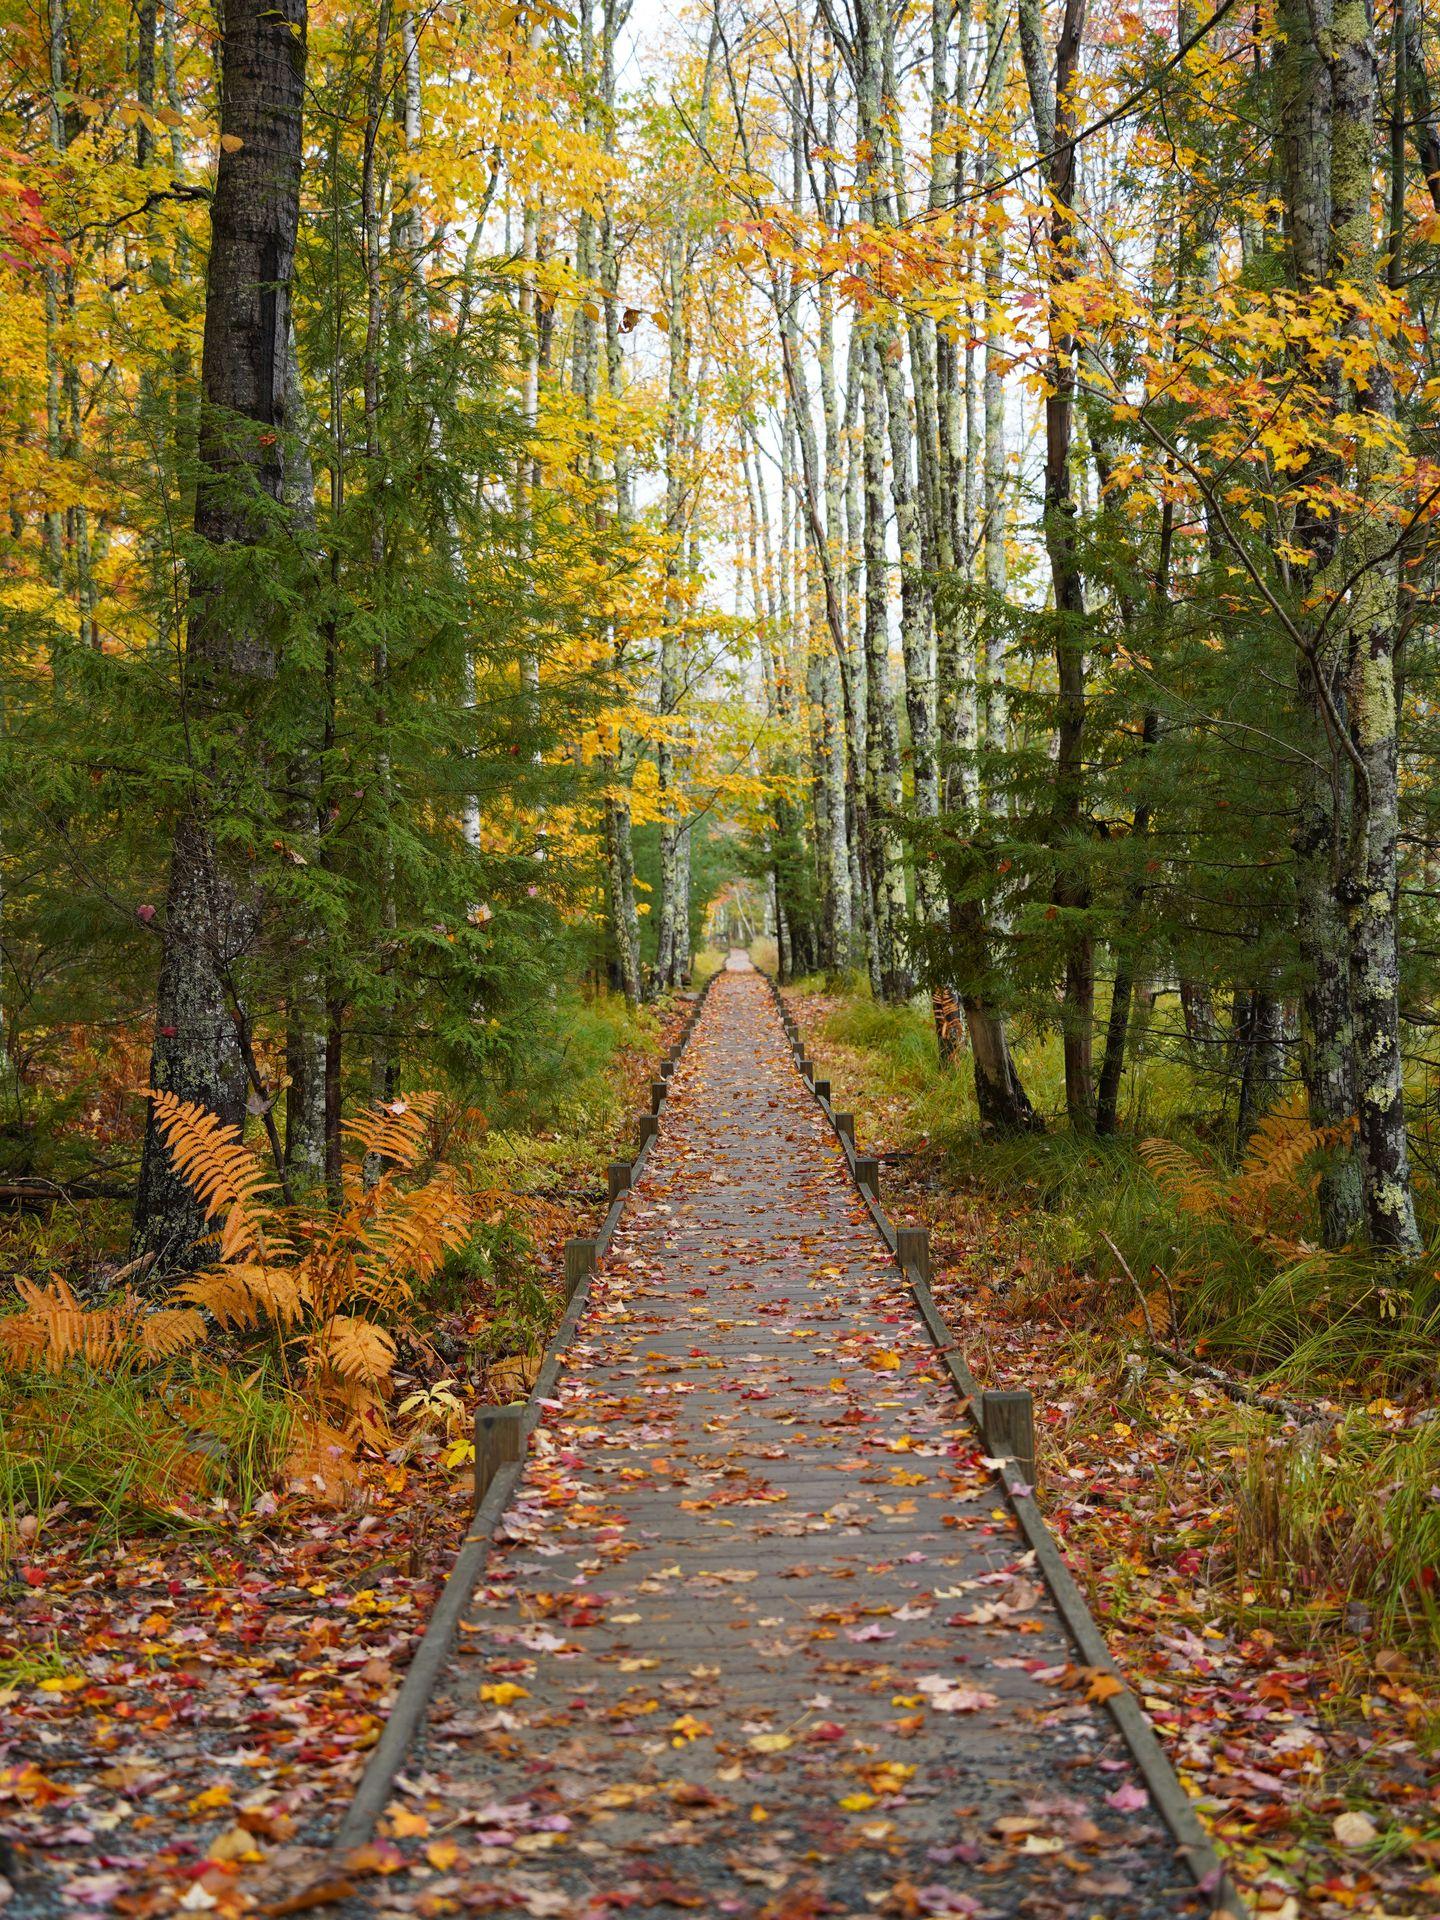 Looking down the boardwalk of the Jesup Path, surrounded by fall foliage